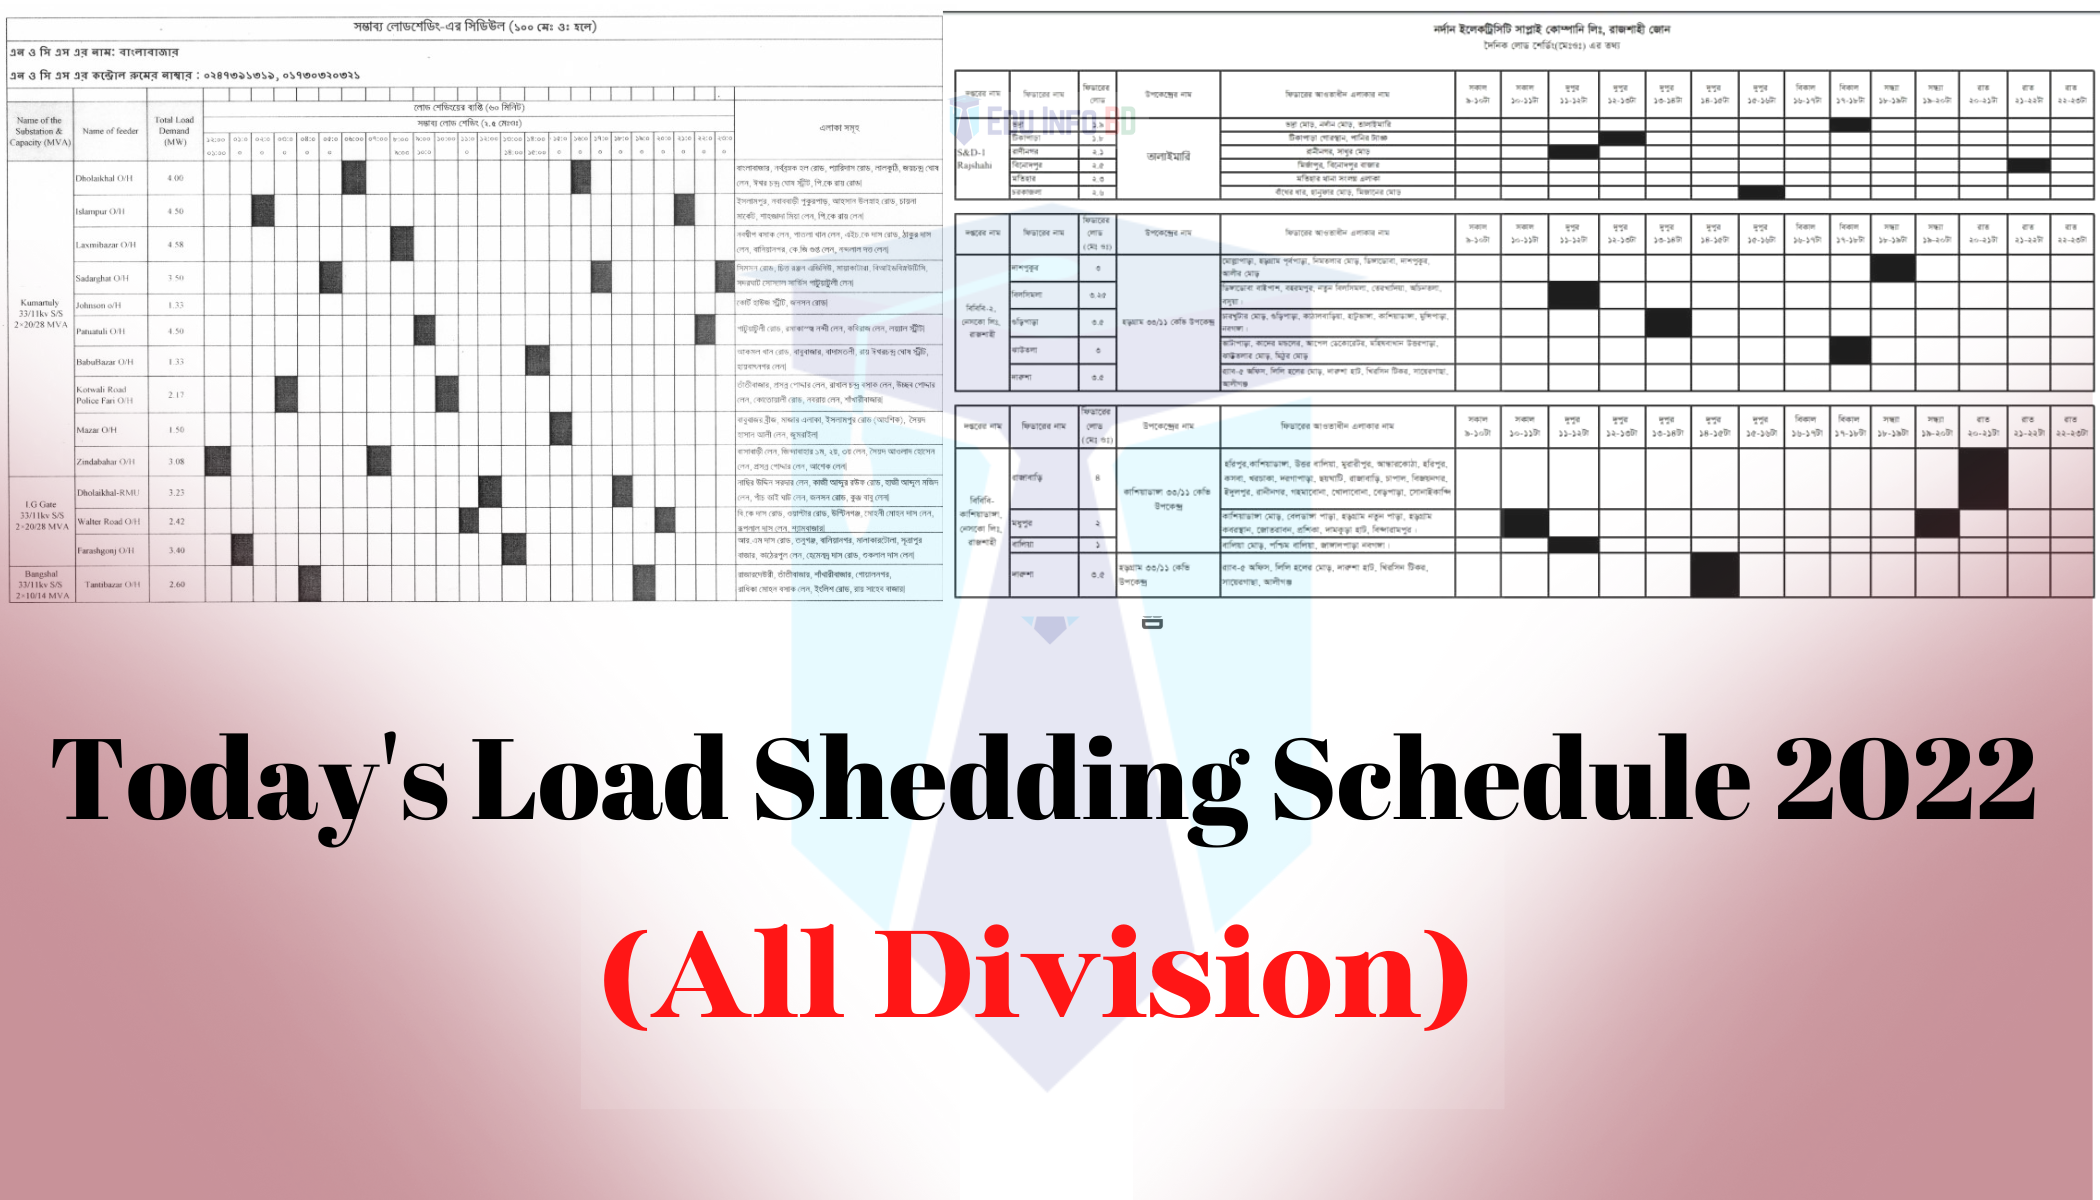 Today's Load Shedding Schedule 2022